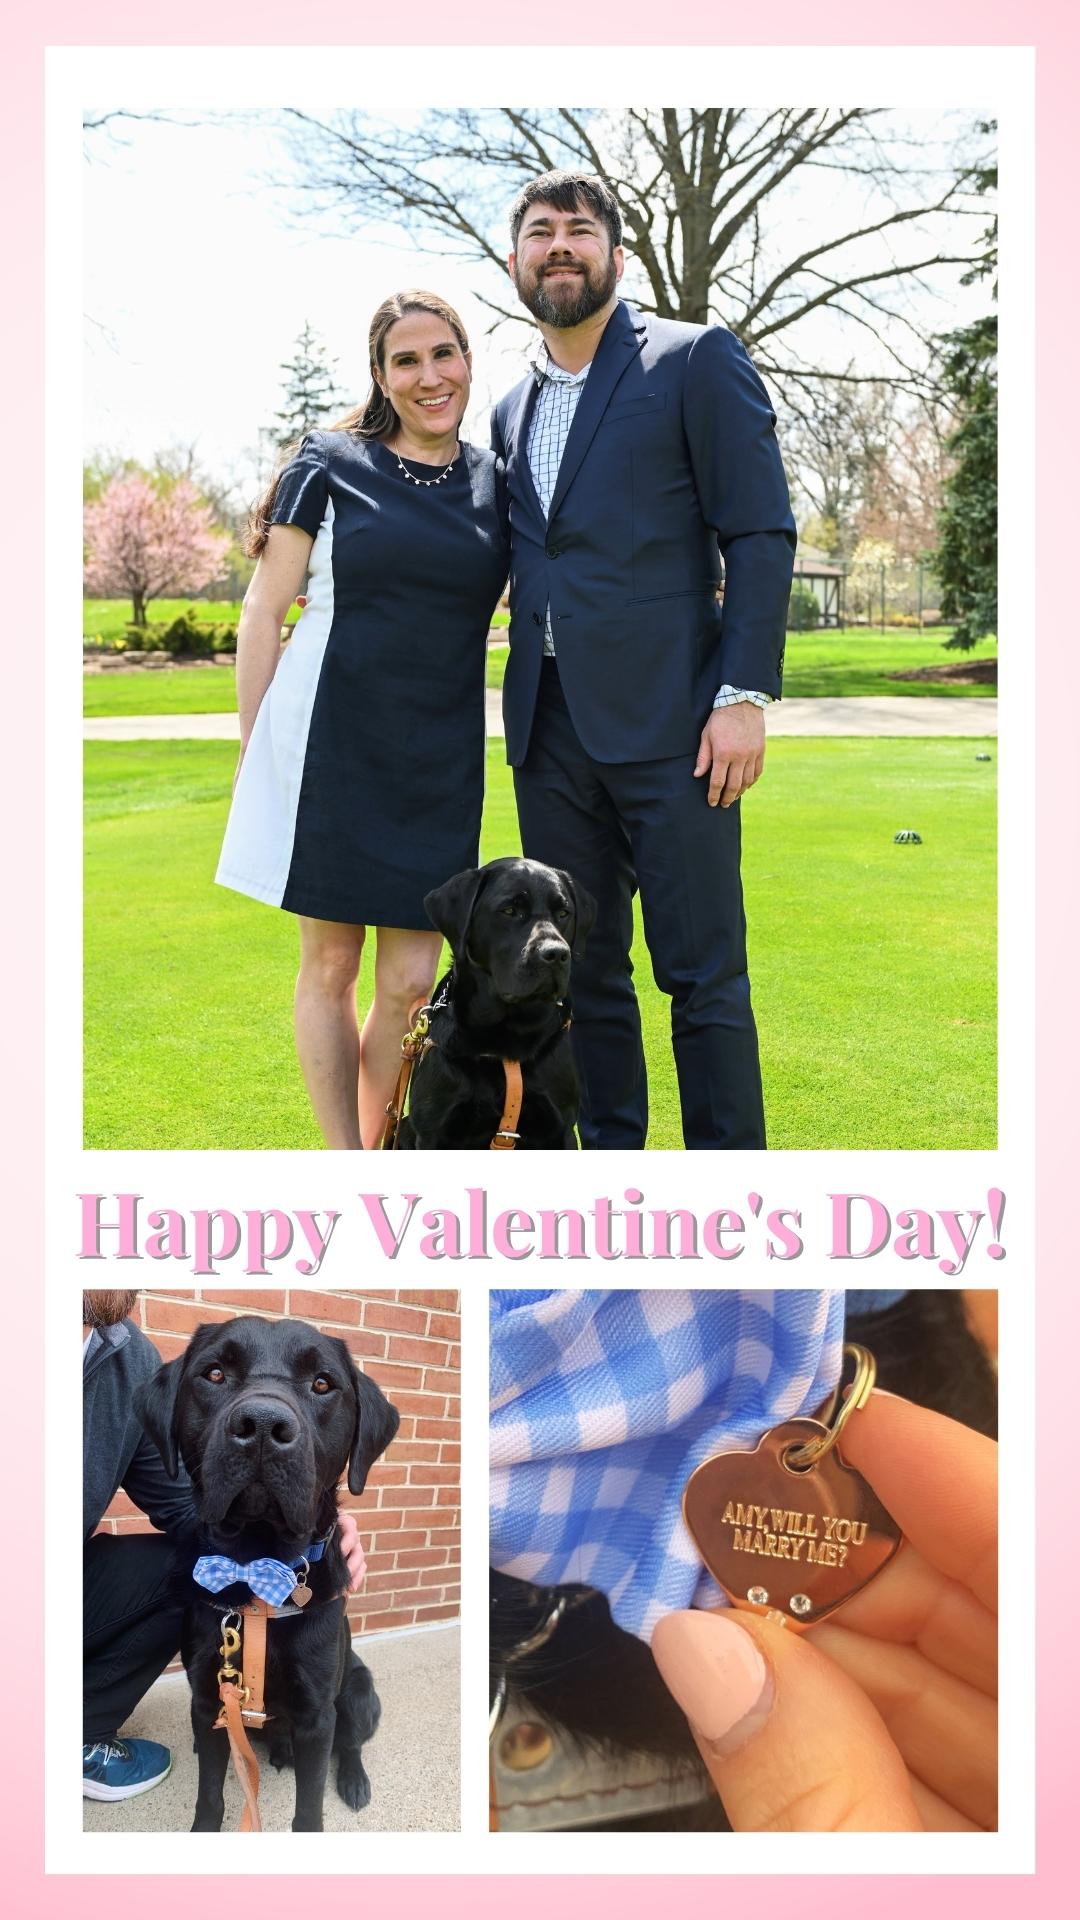 A collage of three images: A young couple smiling in a park with a black lab seated between them; a close-up of a black Lab wearing a leather harness and blue bow tie; an extreme close-up of a gold heart-shaped dog tag with crystals that reads, 